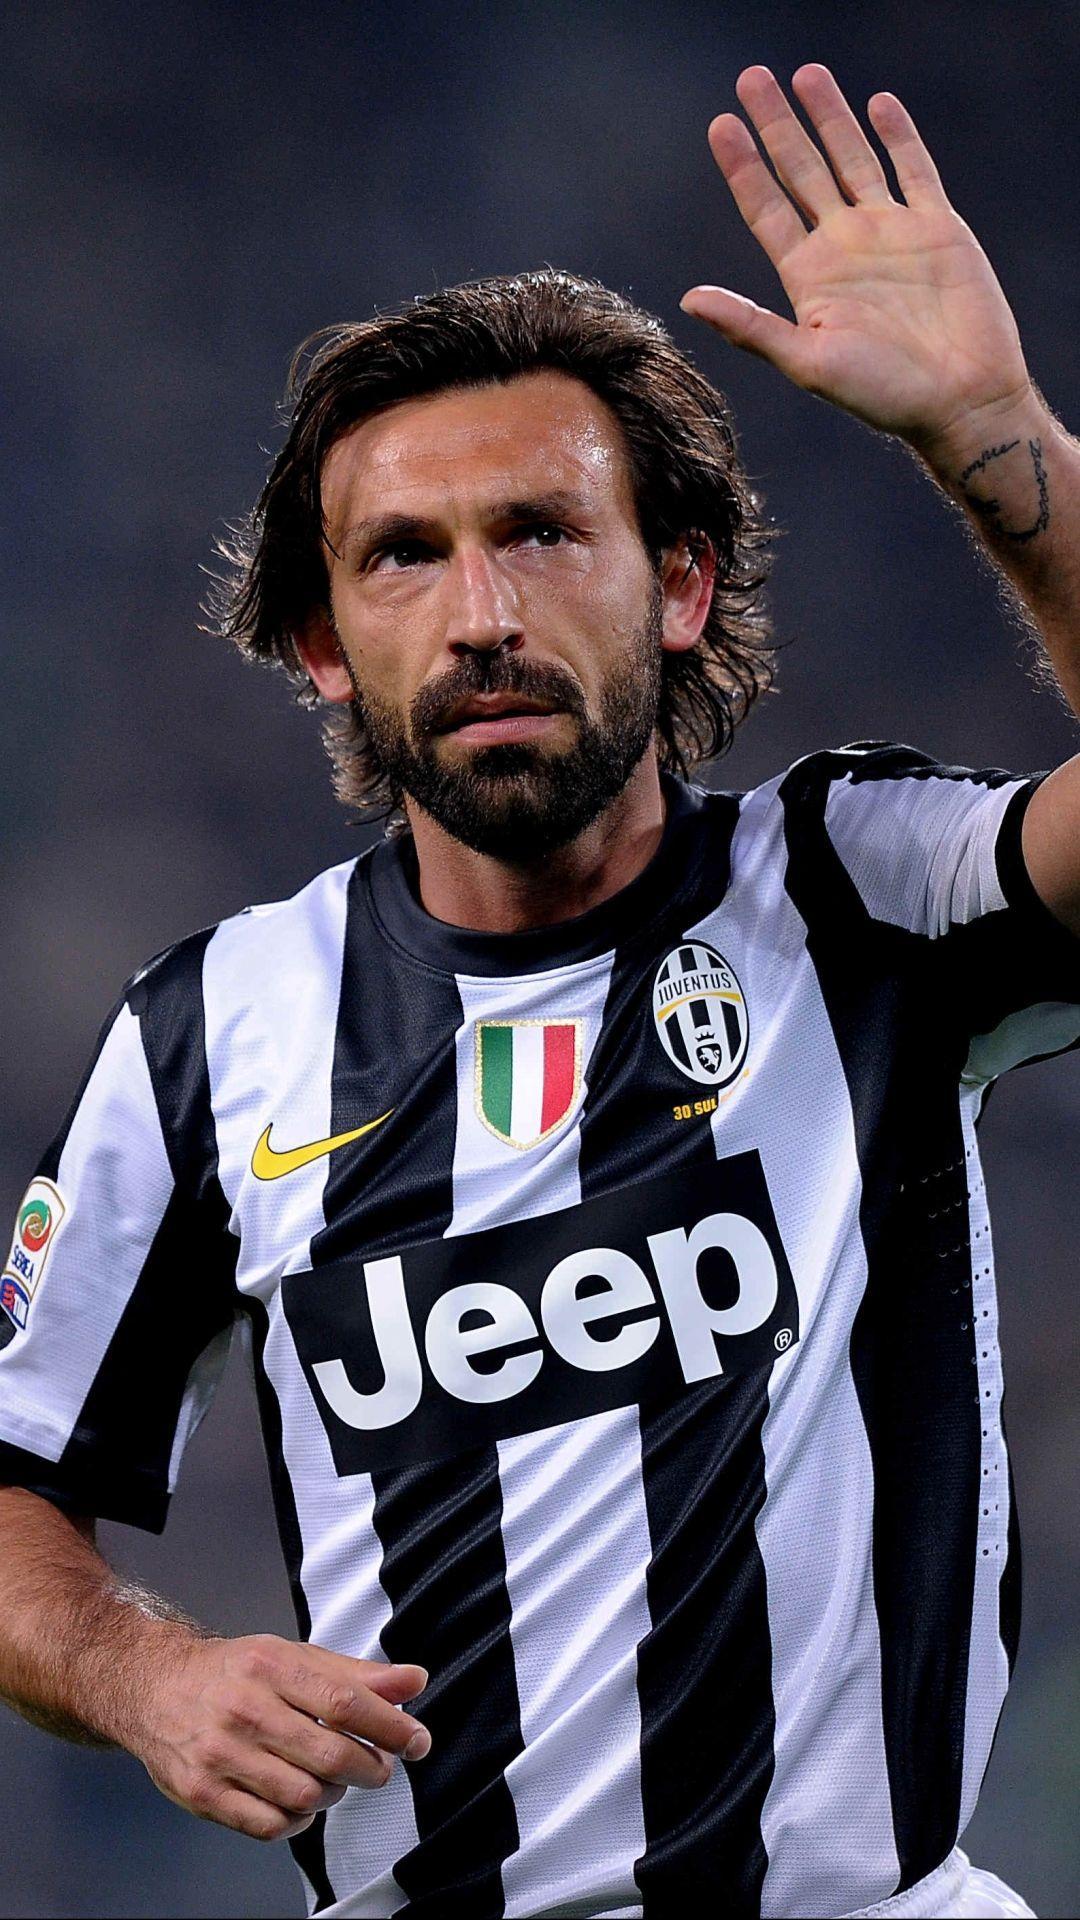 Andrea Pirlo Wallpaper For IPhone